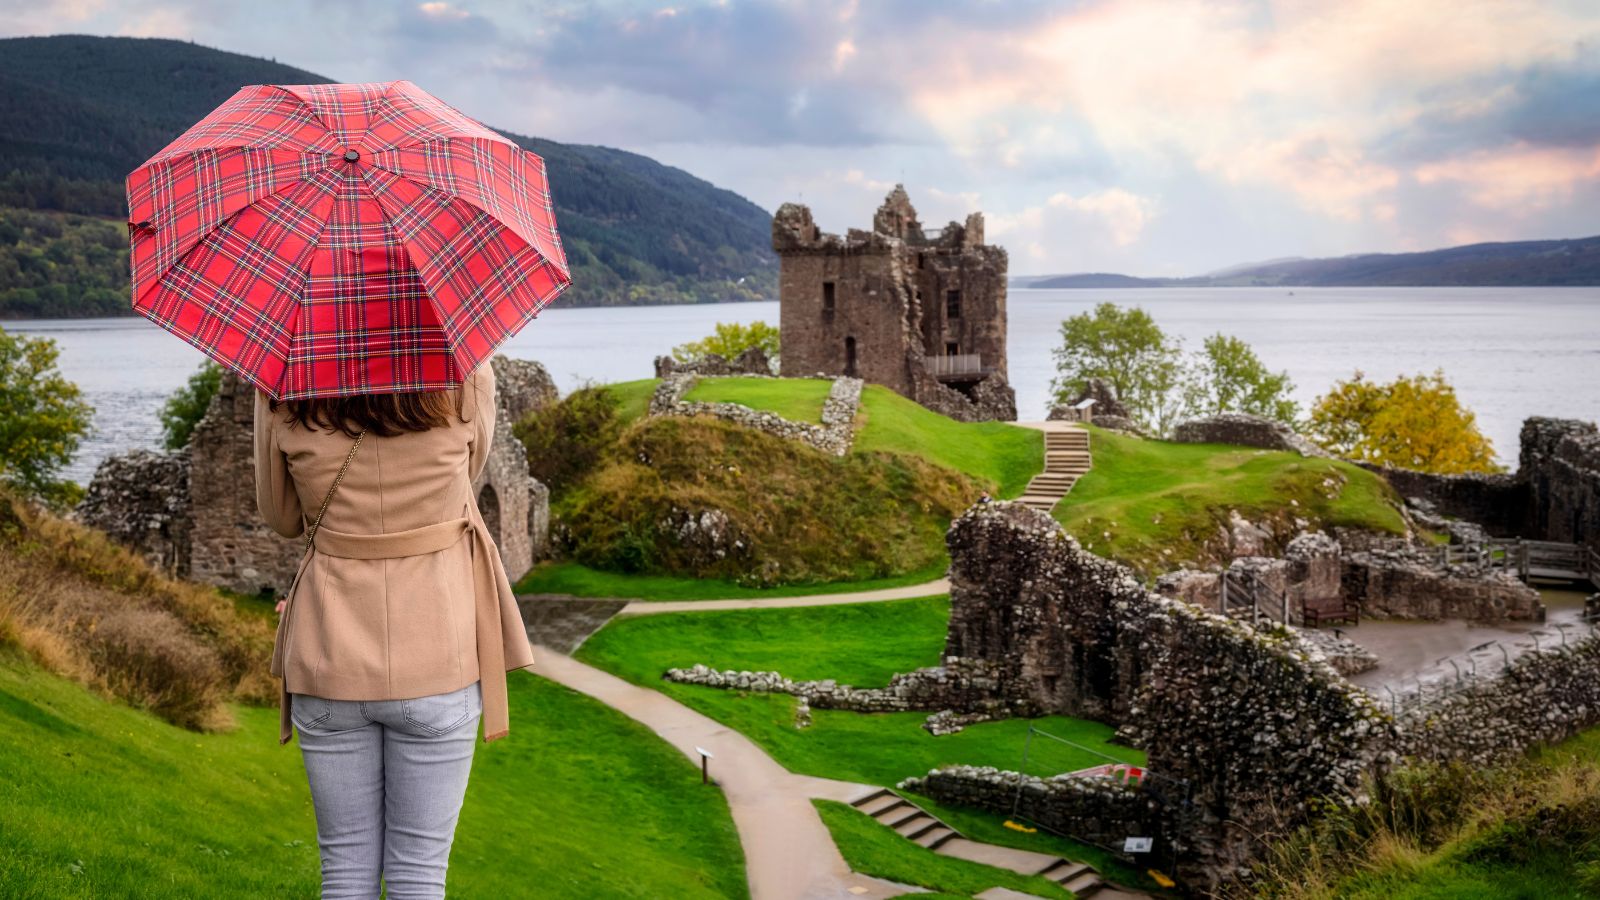 <p>Today’s post is all about the best things to do in Scotland. Not necessarily the most popular or touristy. The <em>best</em>…in my opinion, at least.</p> <p>I’ve been to Scotland twice. First, on a school trip about 15 years ago. And then again in 2022, when I ran from John O’Groats to Land’s End.</p> <p>That second visit really introduced me to the country, and I instantly fell in love with it. Everything from the wild landscapes and historic towns to the welcoming locals made me eager to go back and see more of Scotland ASAP. If you’re heading there soon, then here are 18 things I recommend you do…</p>